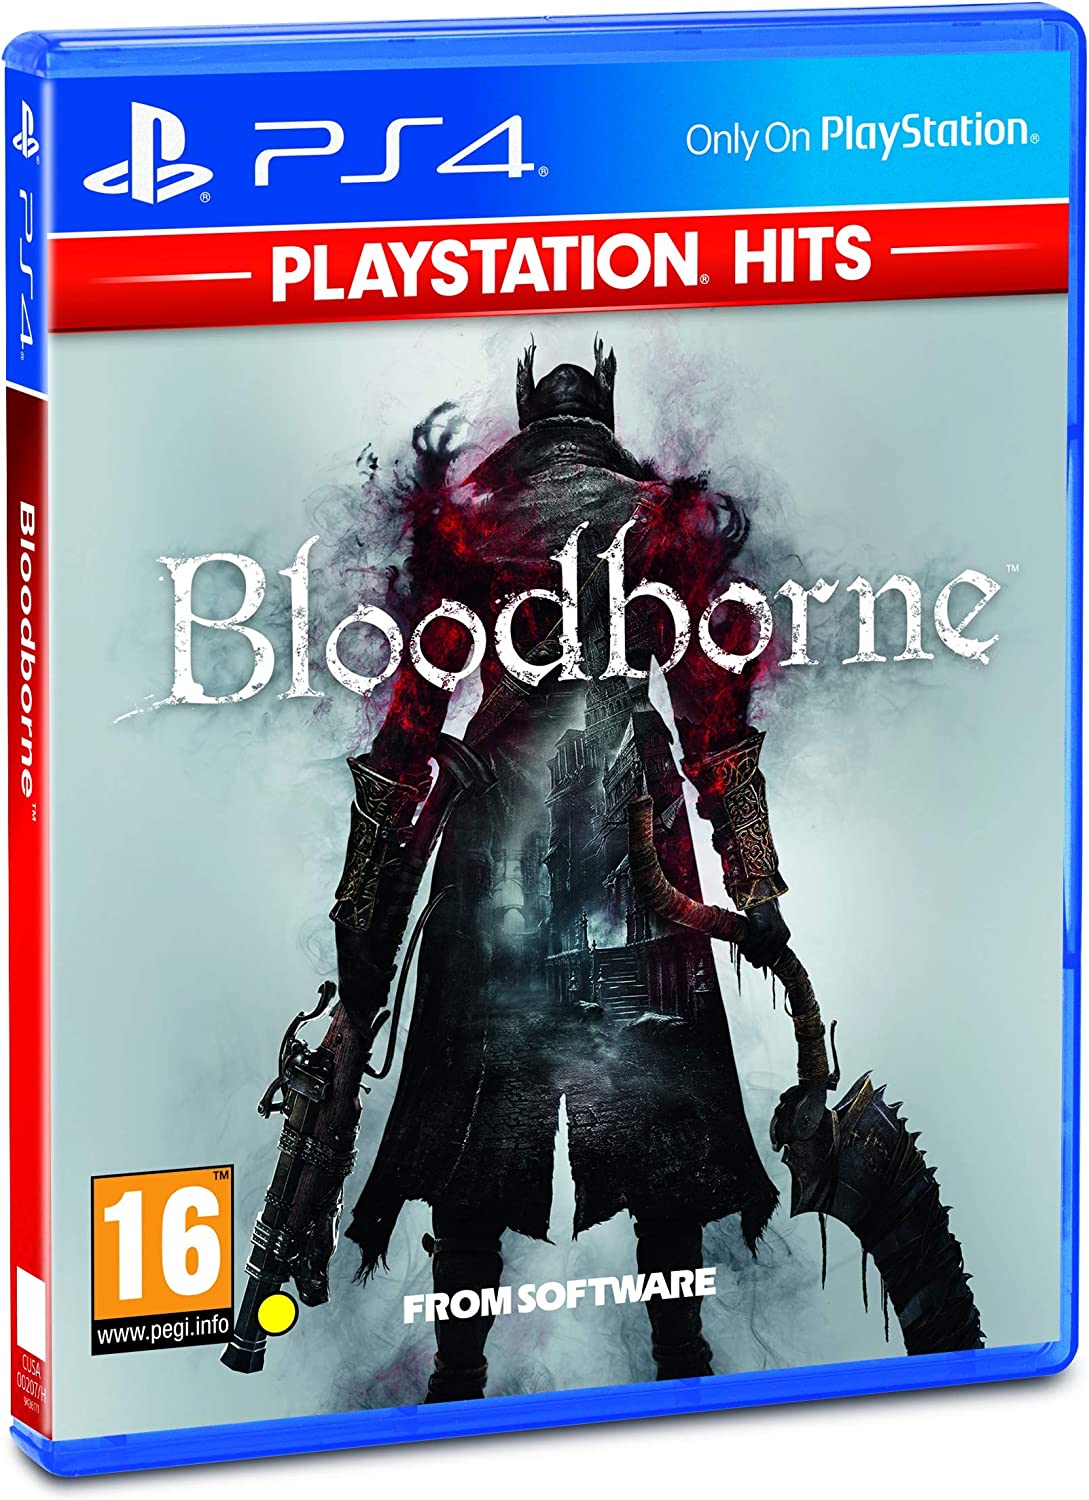 Bloodborne Playstation 4 Ps4 Game, Playstation 4 B Game, From Software